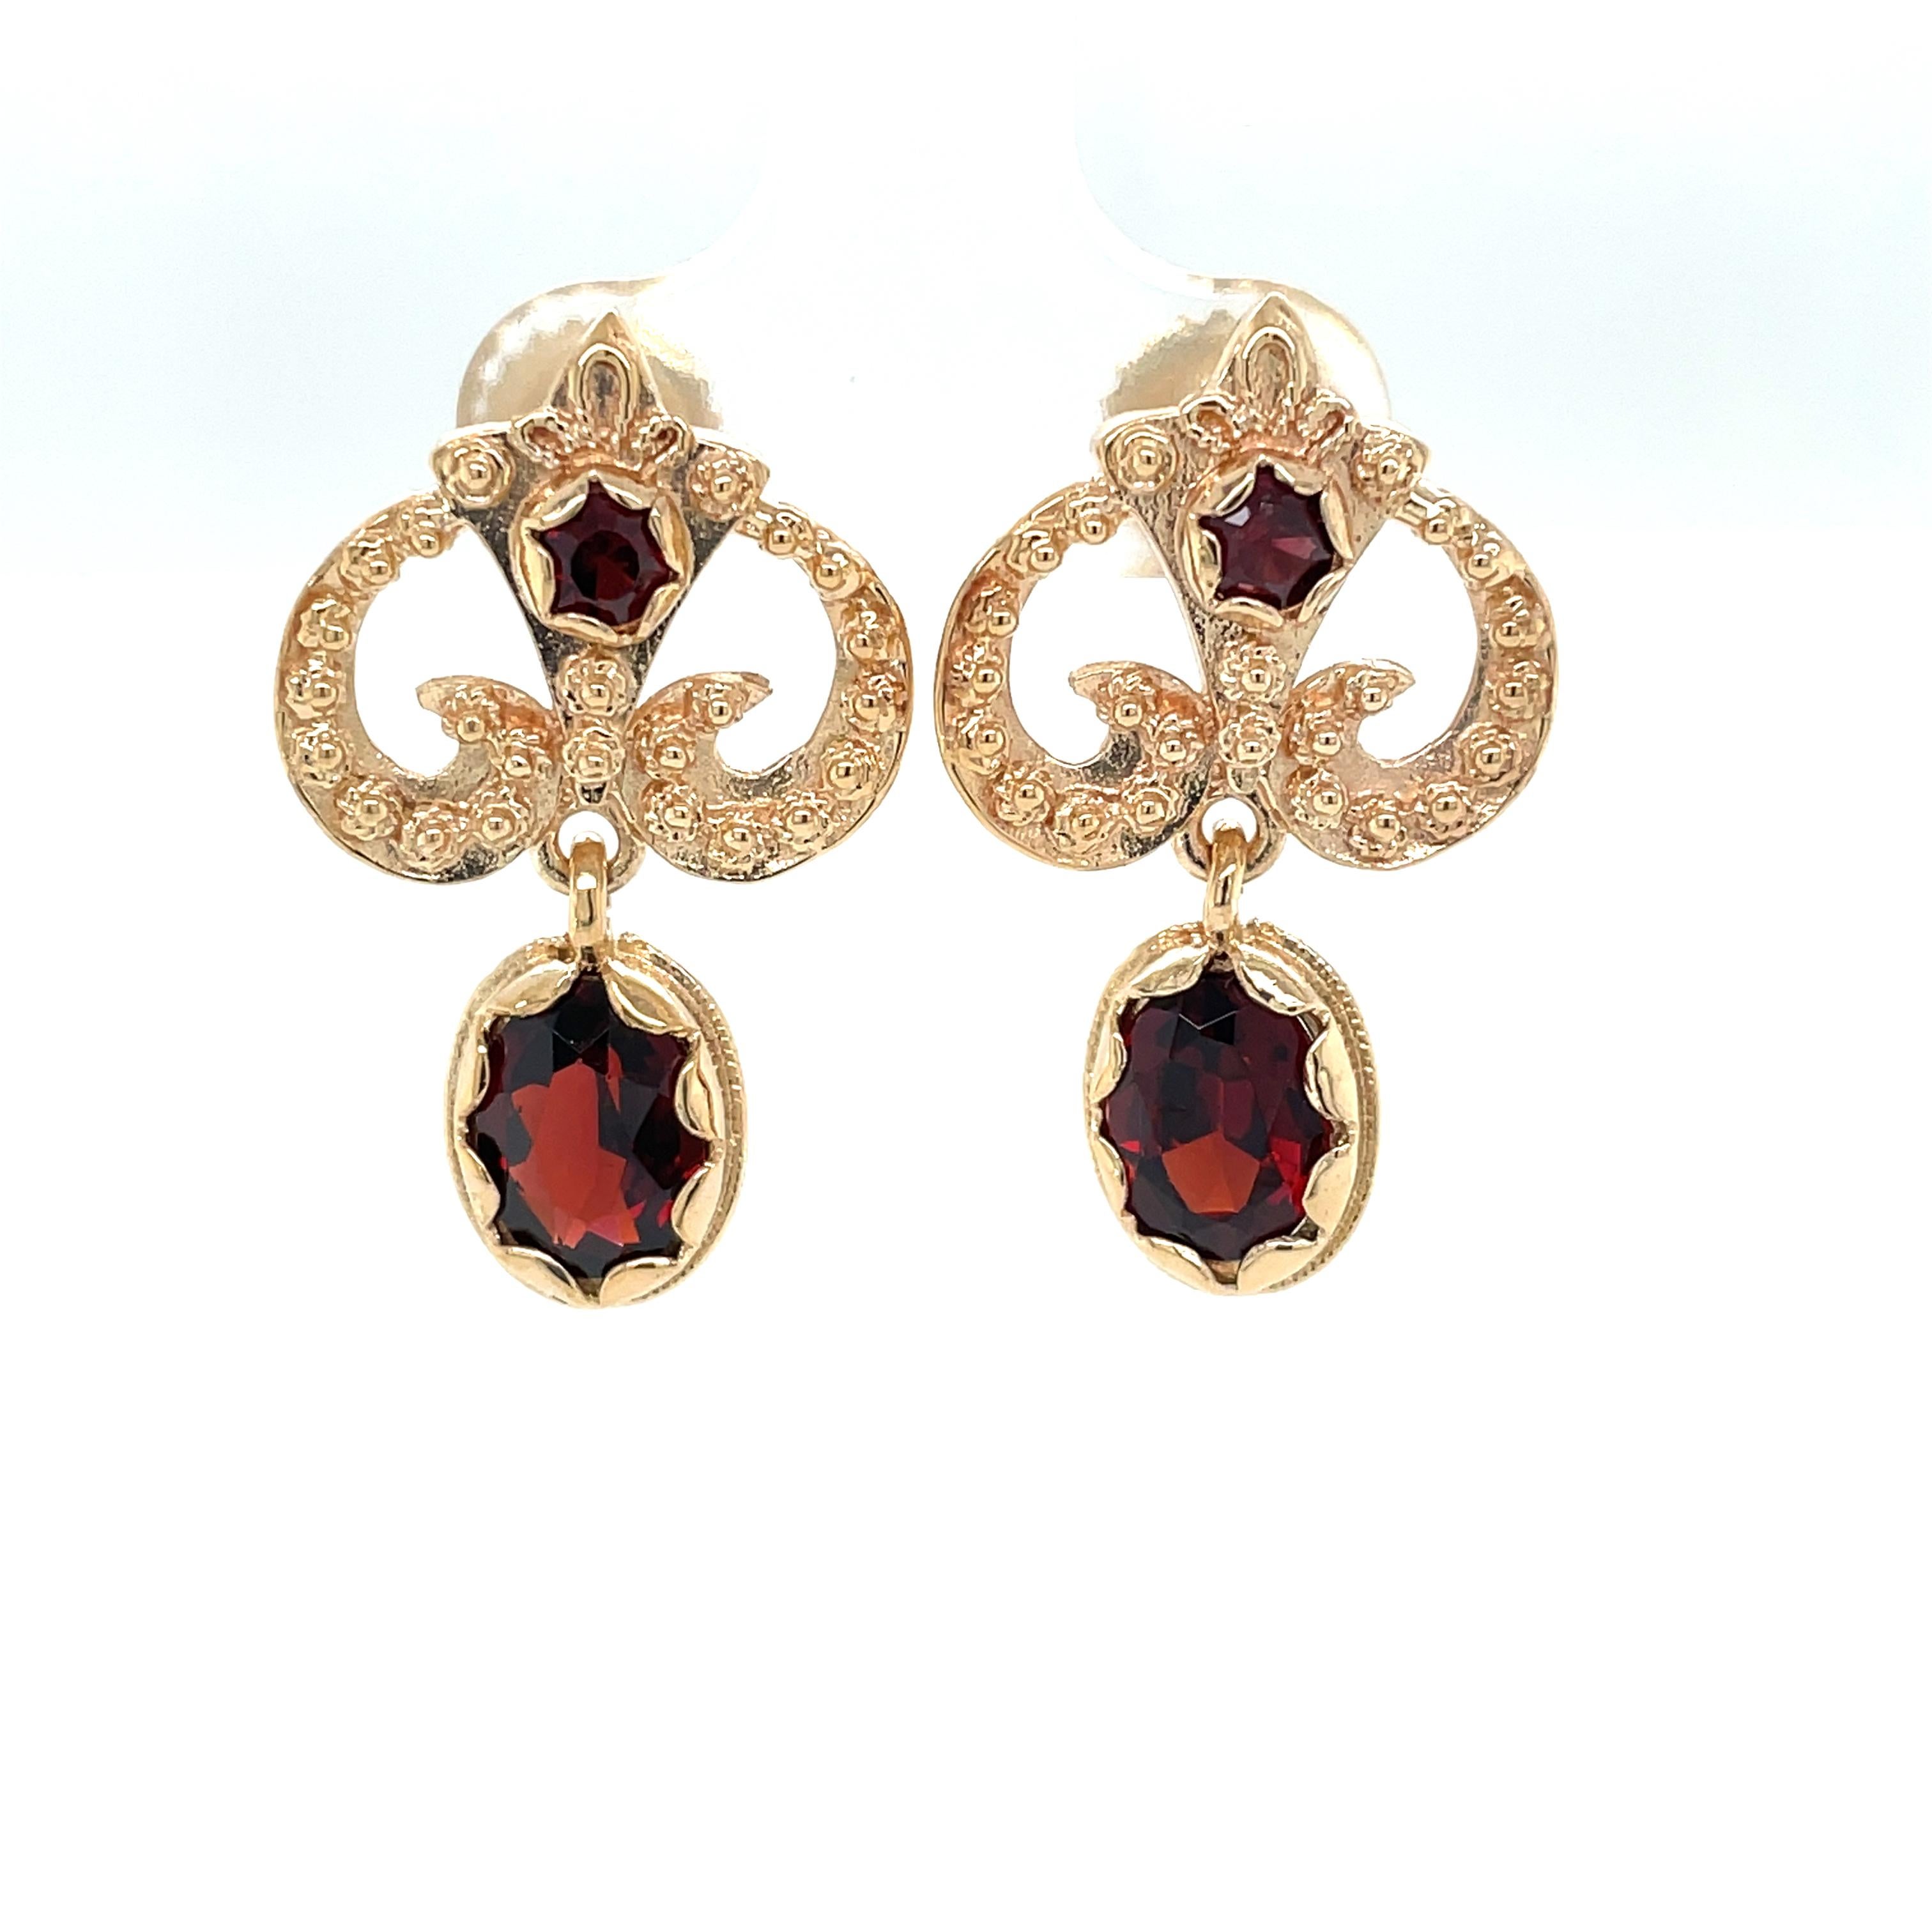 Rich red garnet is artfully bezel set in complementing 14 karat yellow gold which brings out the warmth of the 
gemstone. The Fleur delis upper dangle with its attractive open design is enhanced with textured gold and measures  approximately 5/8